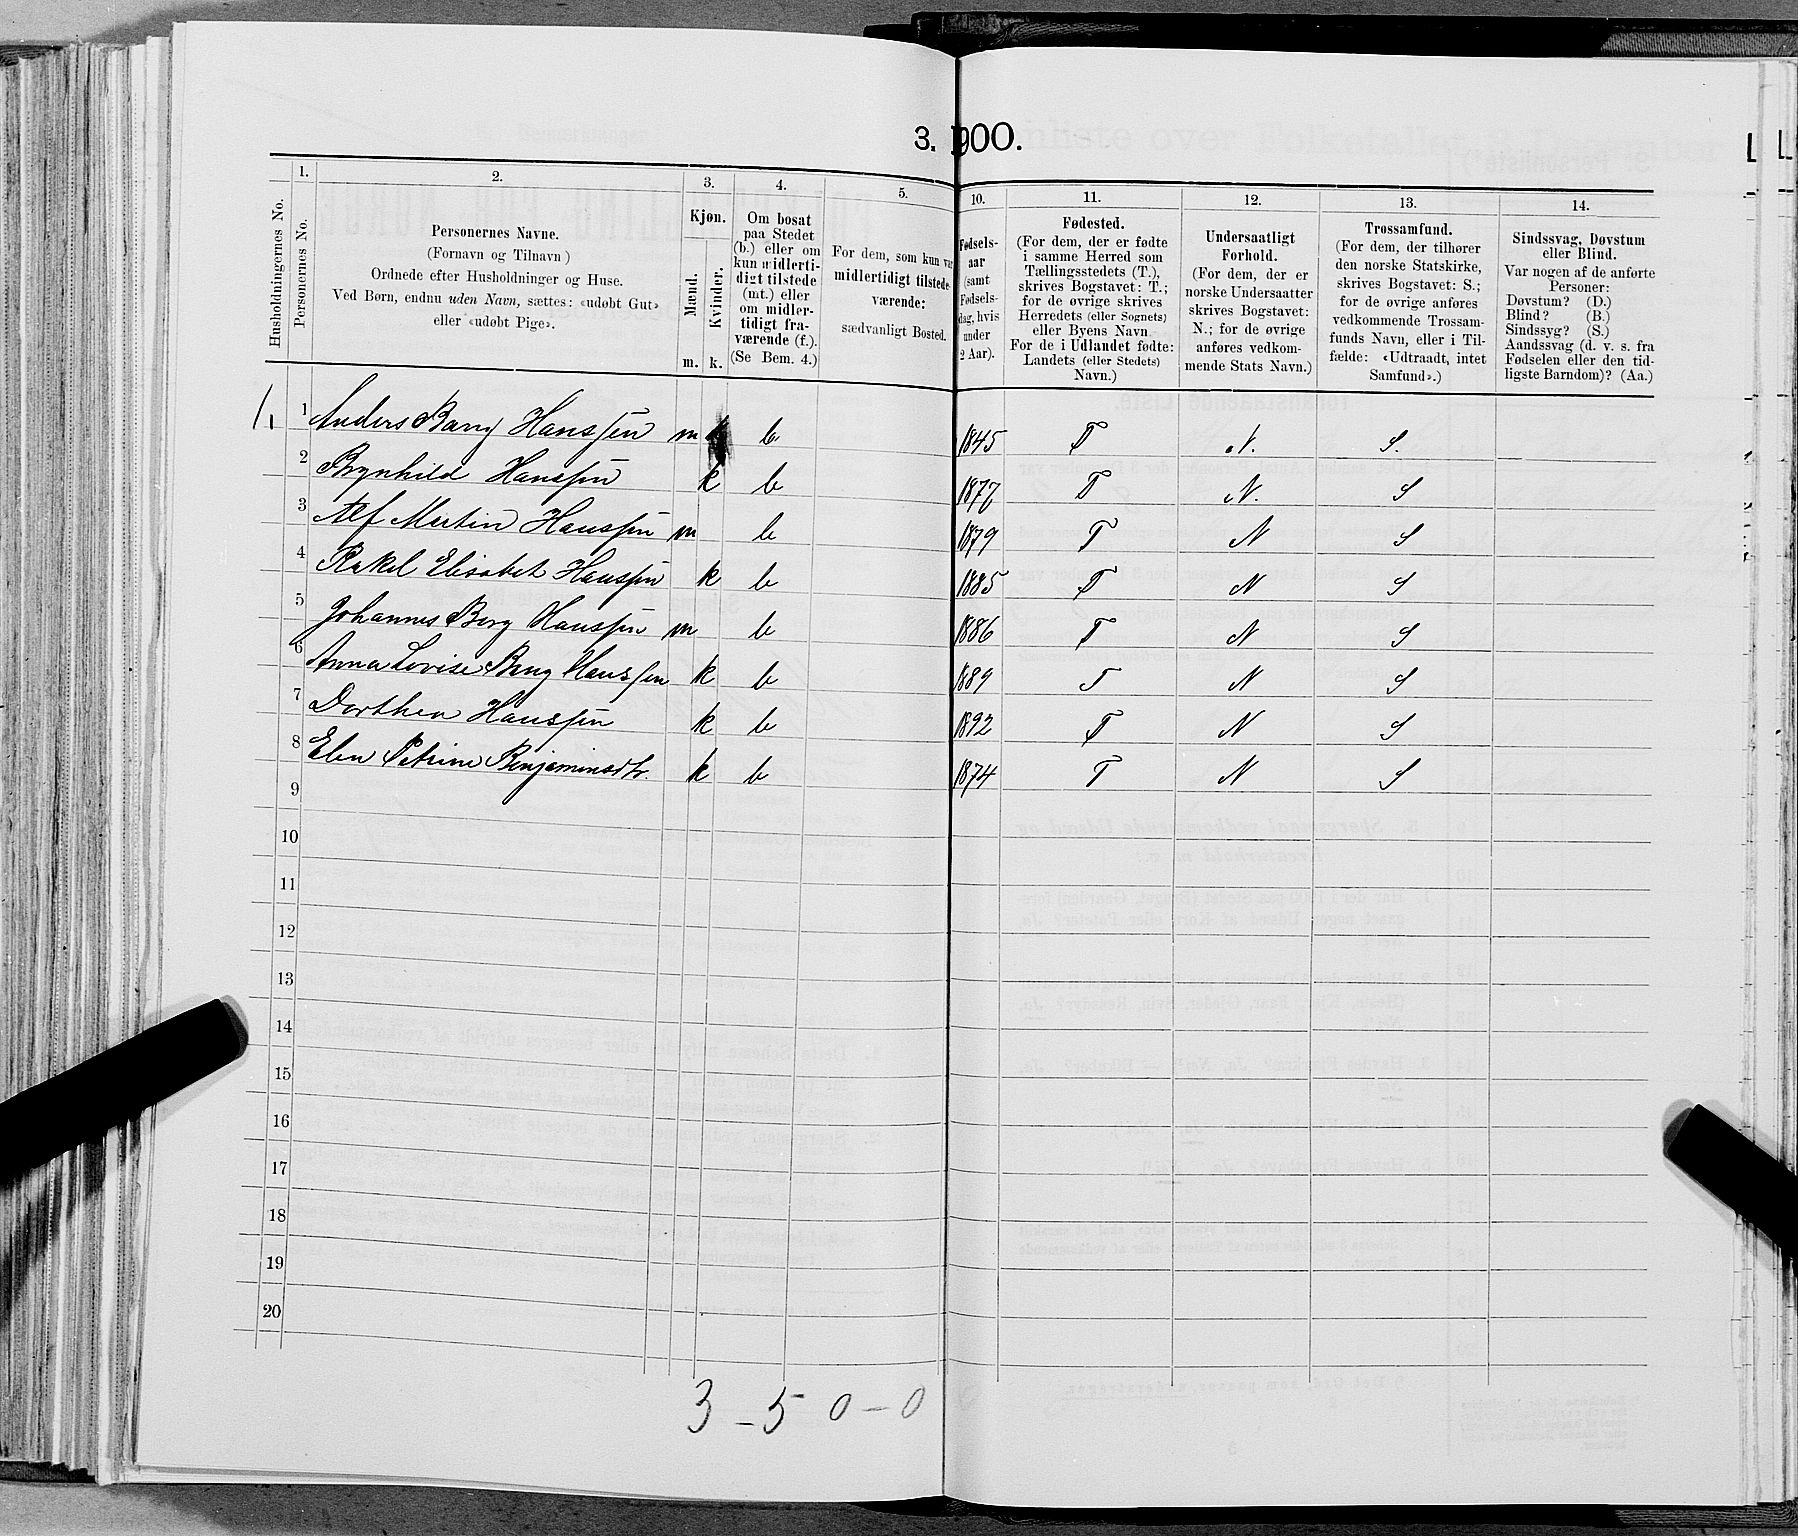 SAT, 1900 census for Mo, 1900, p. 348